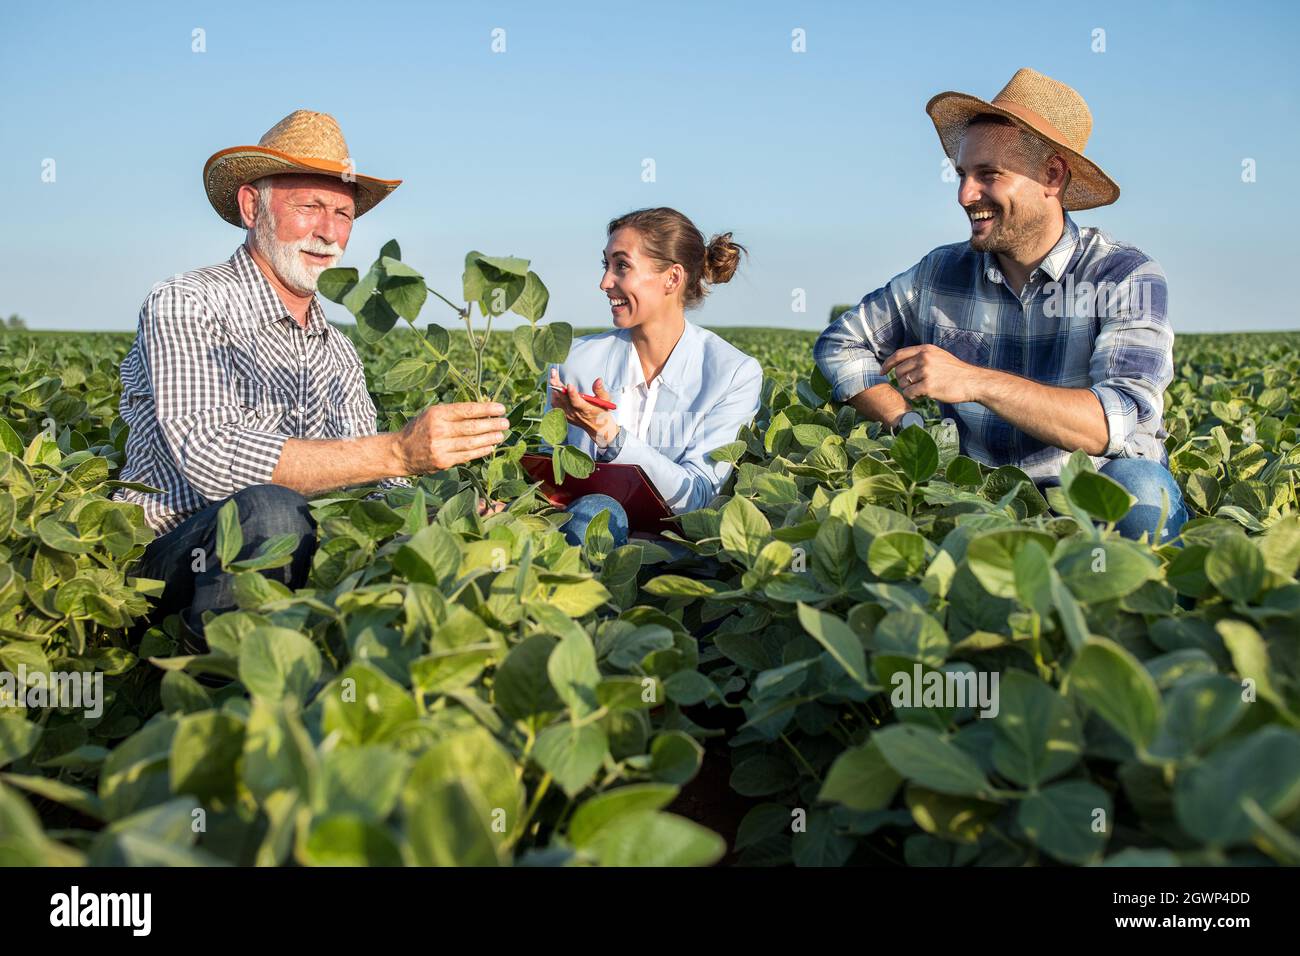 Female insurance sales rep touching root of soy plant smiilng. Two male farmers crouching in soy field explaining showing seedling to agronomist. Stock Photo